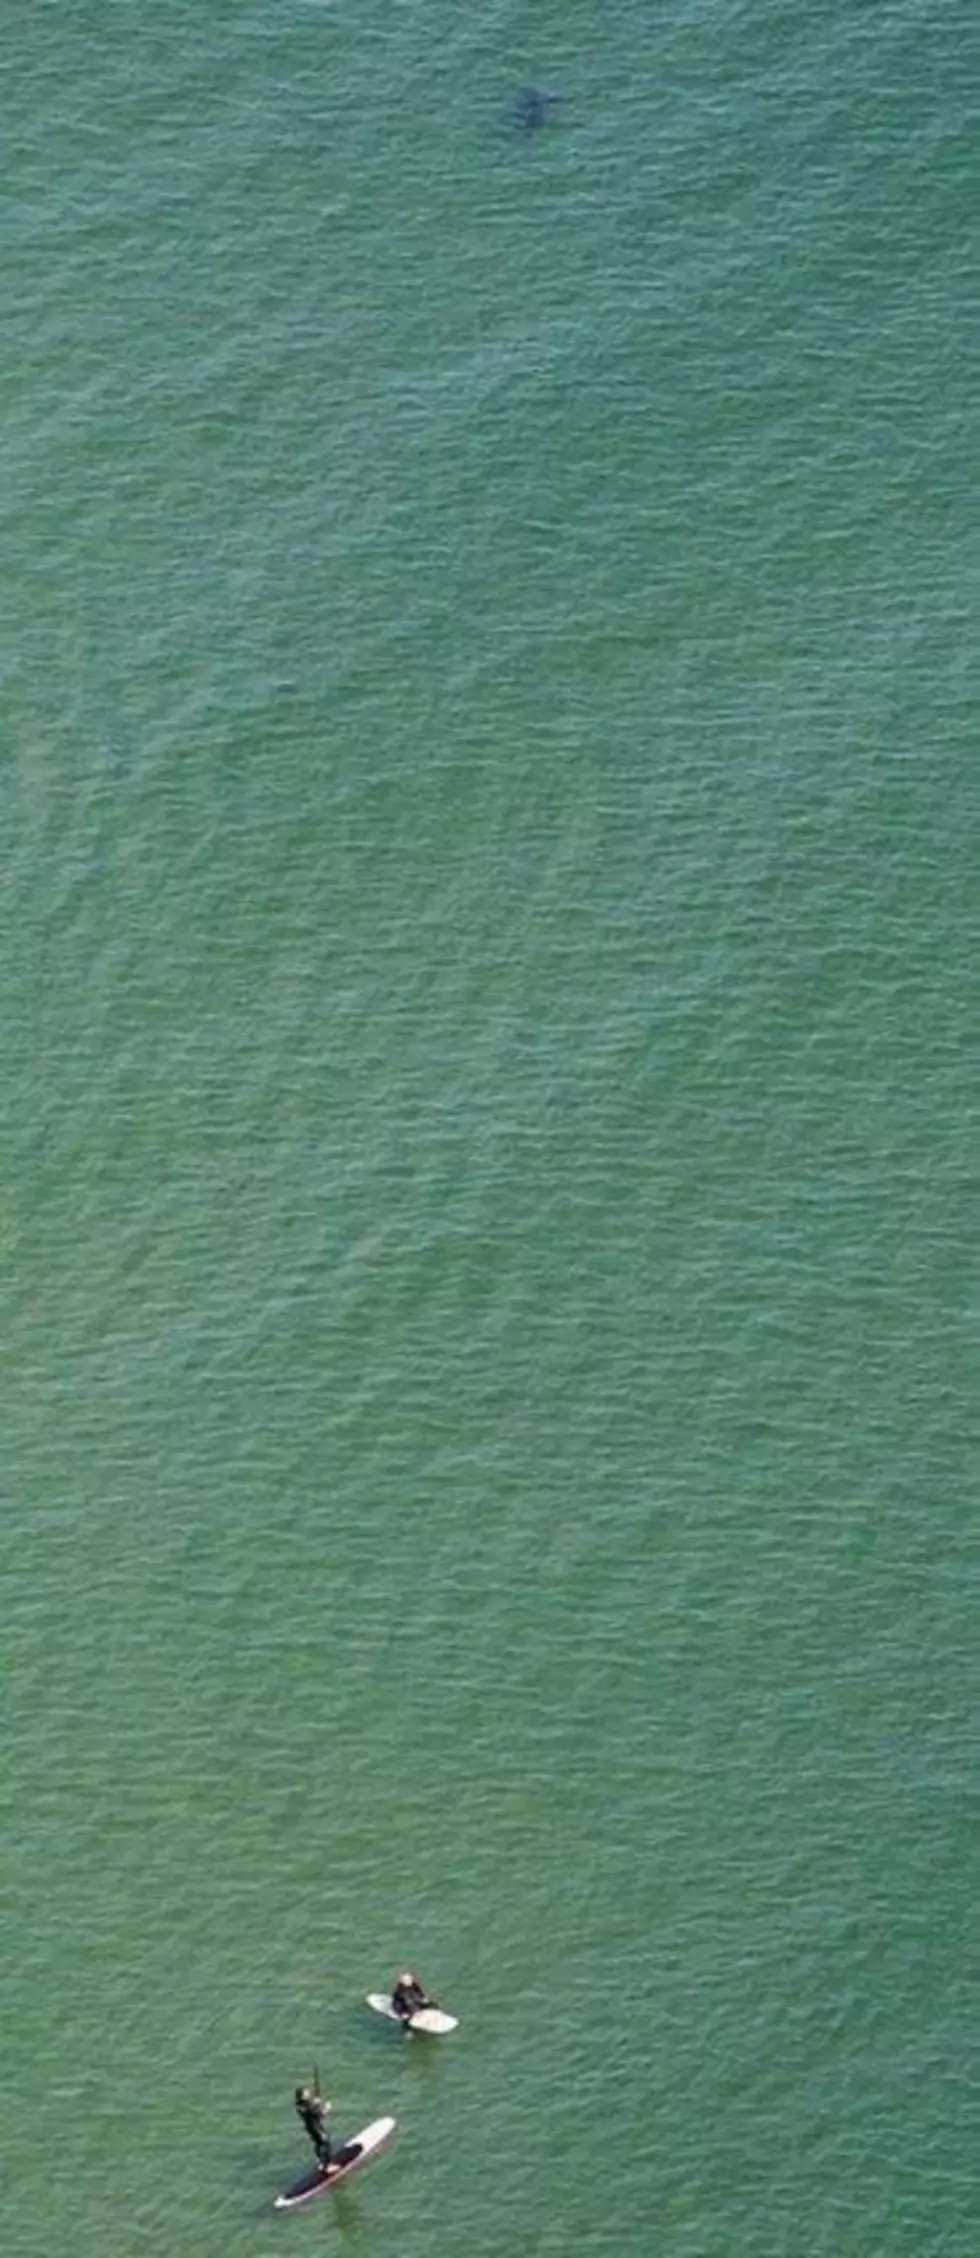 Amazing Shark Photo Shows Great White Near MA Surfer And Paddleboarder [PHOTO + VIDEO]